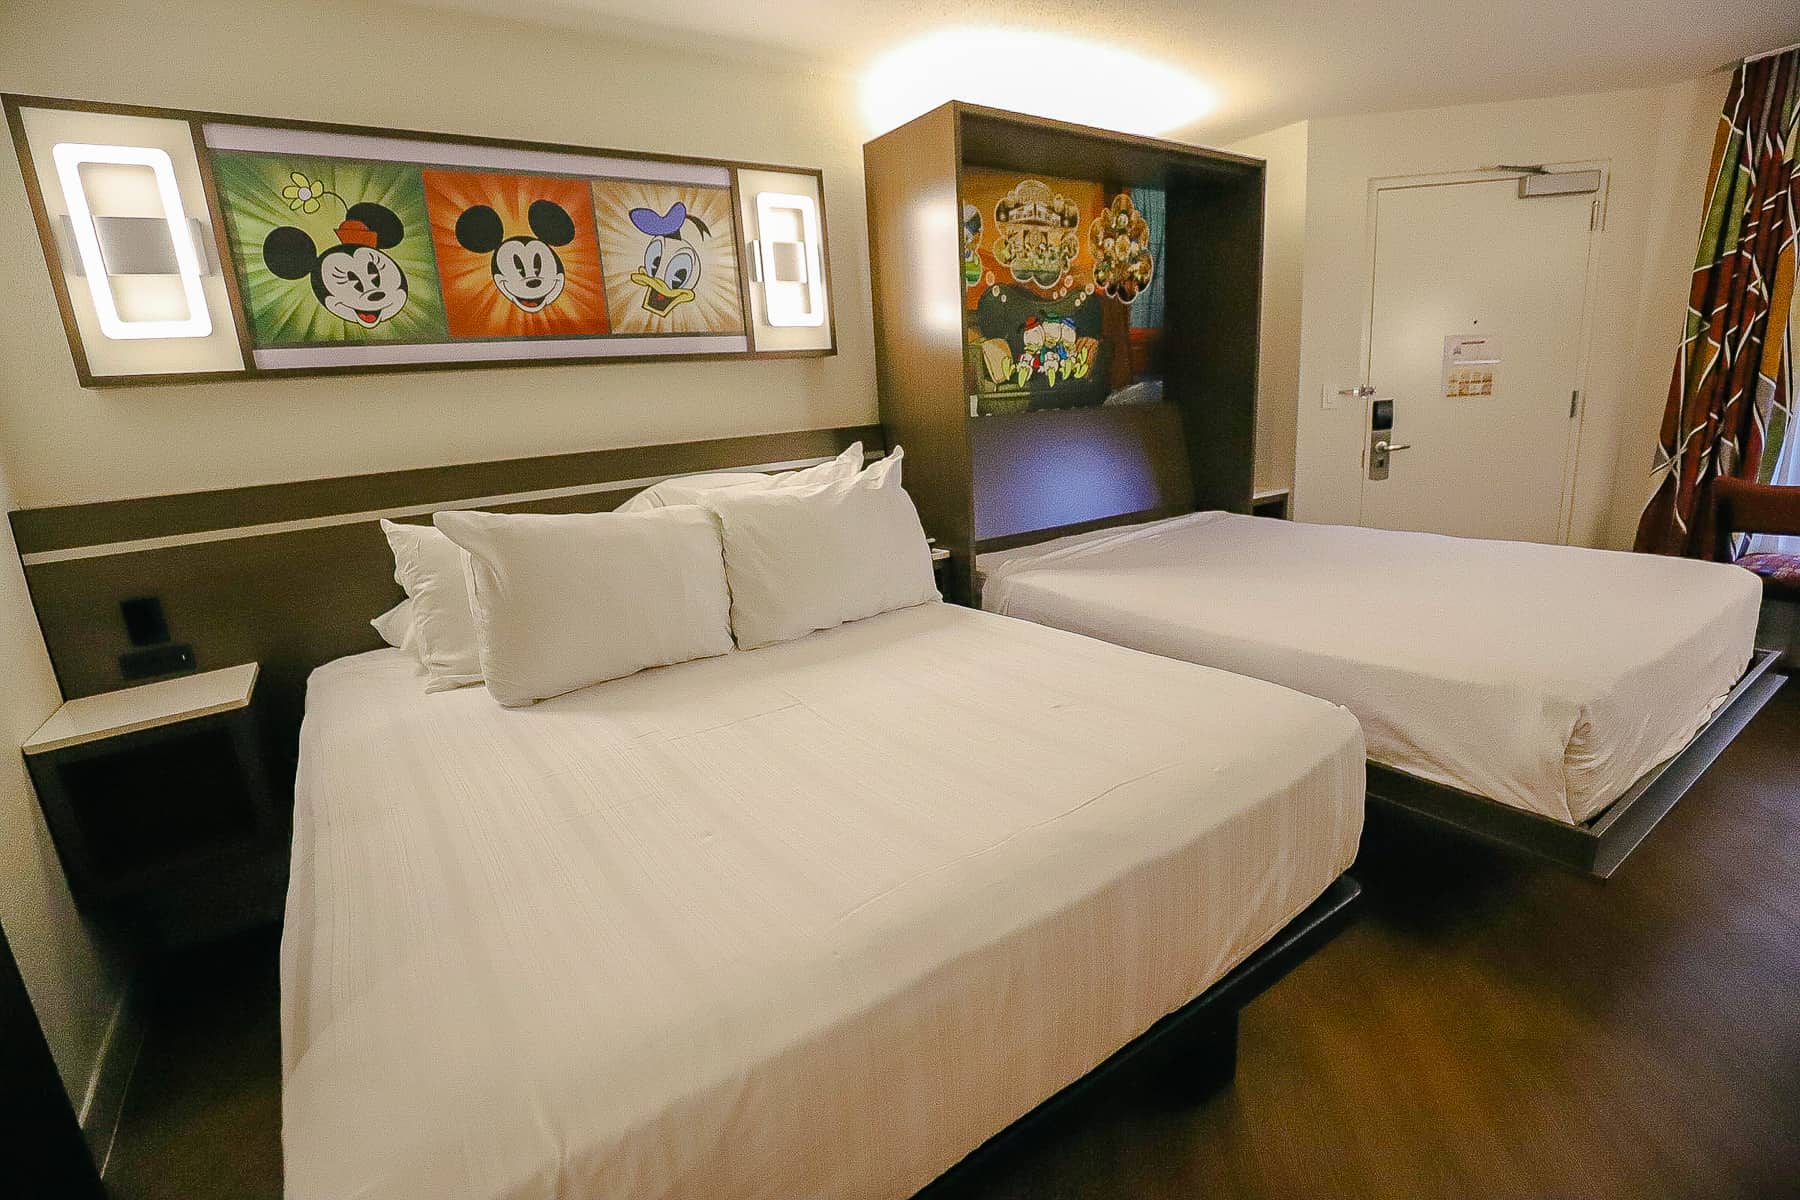 shows the layout of the room with two queen-size beds